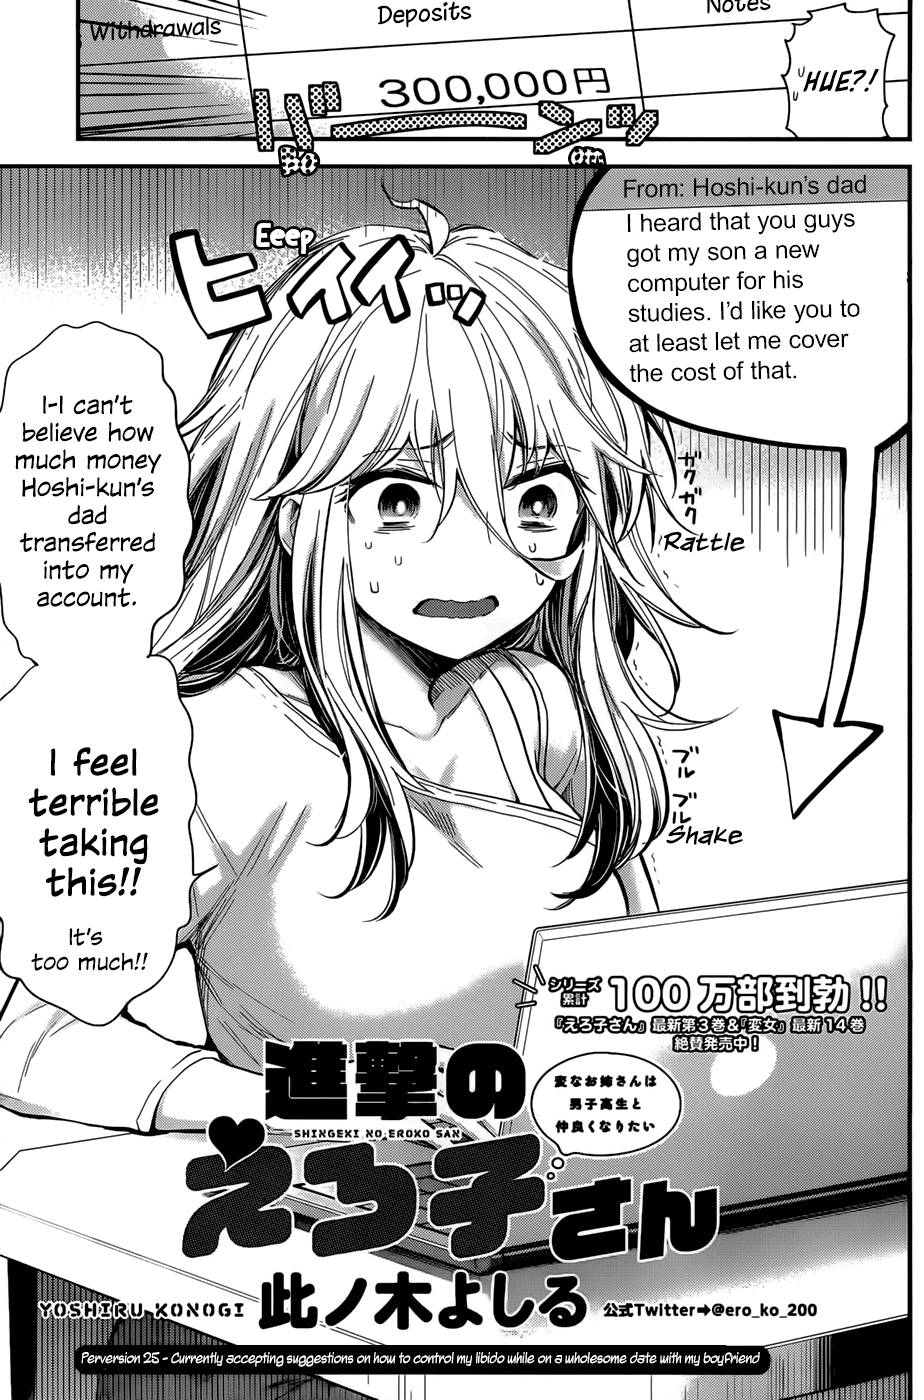 Shingeki No Eroko-San Chapter 25: Perversion 25: Currently Accepting Suggestions On How To Control My Libido While On A Wholesome Date With My Boyfriend - Picture 1